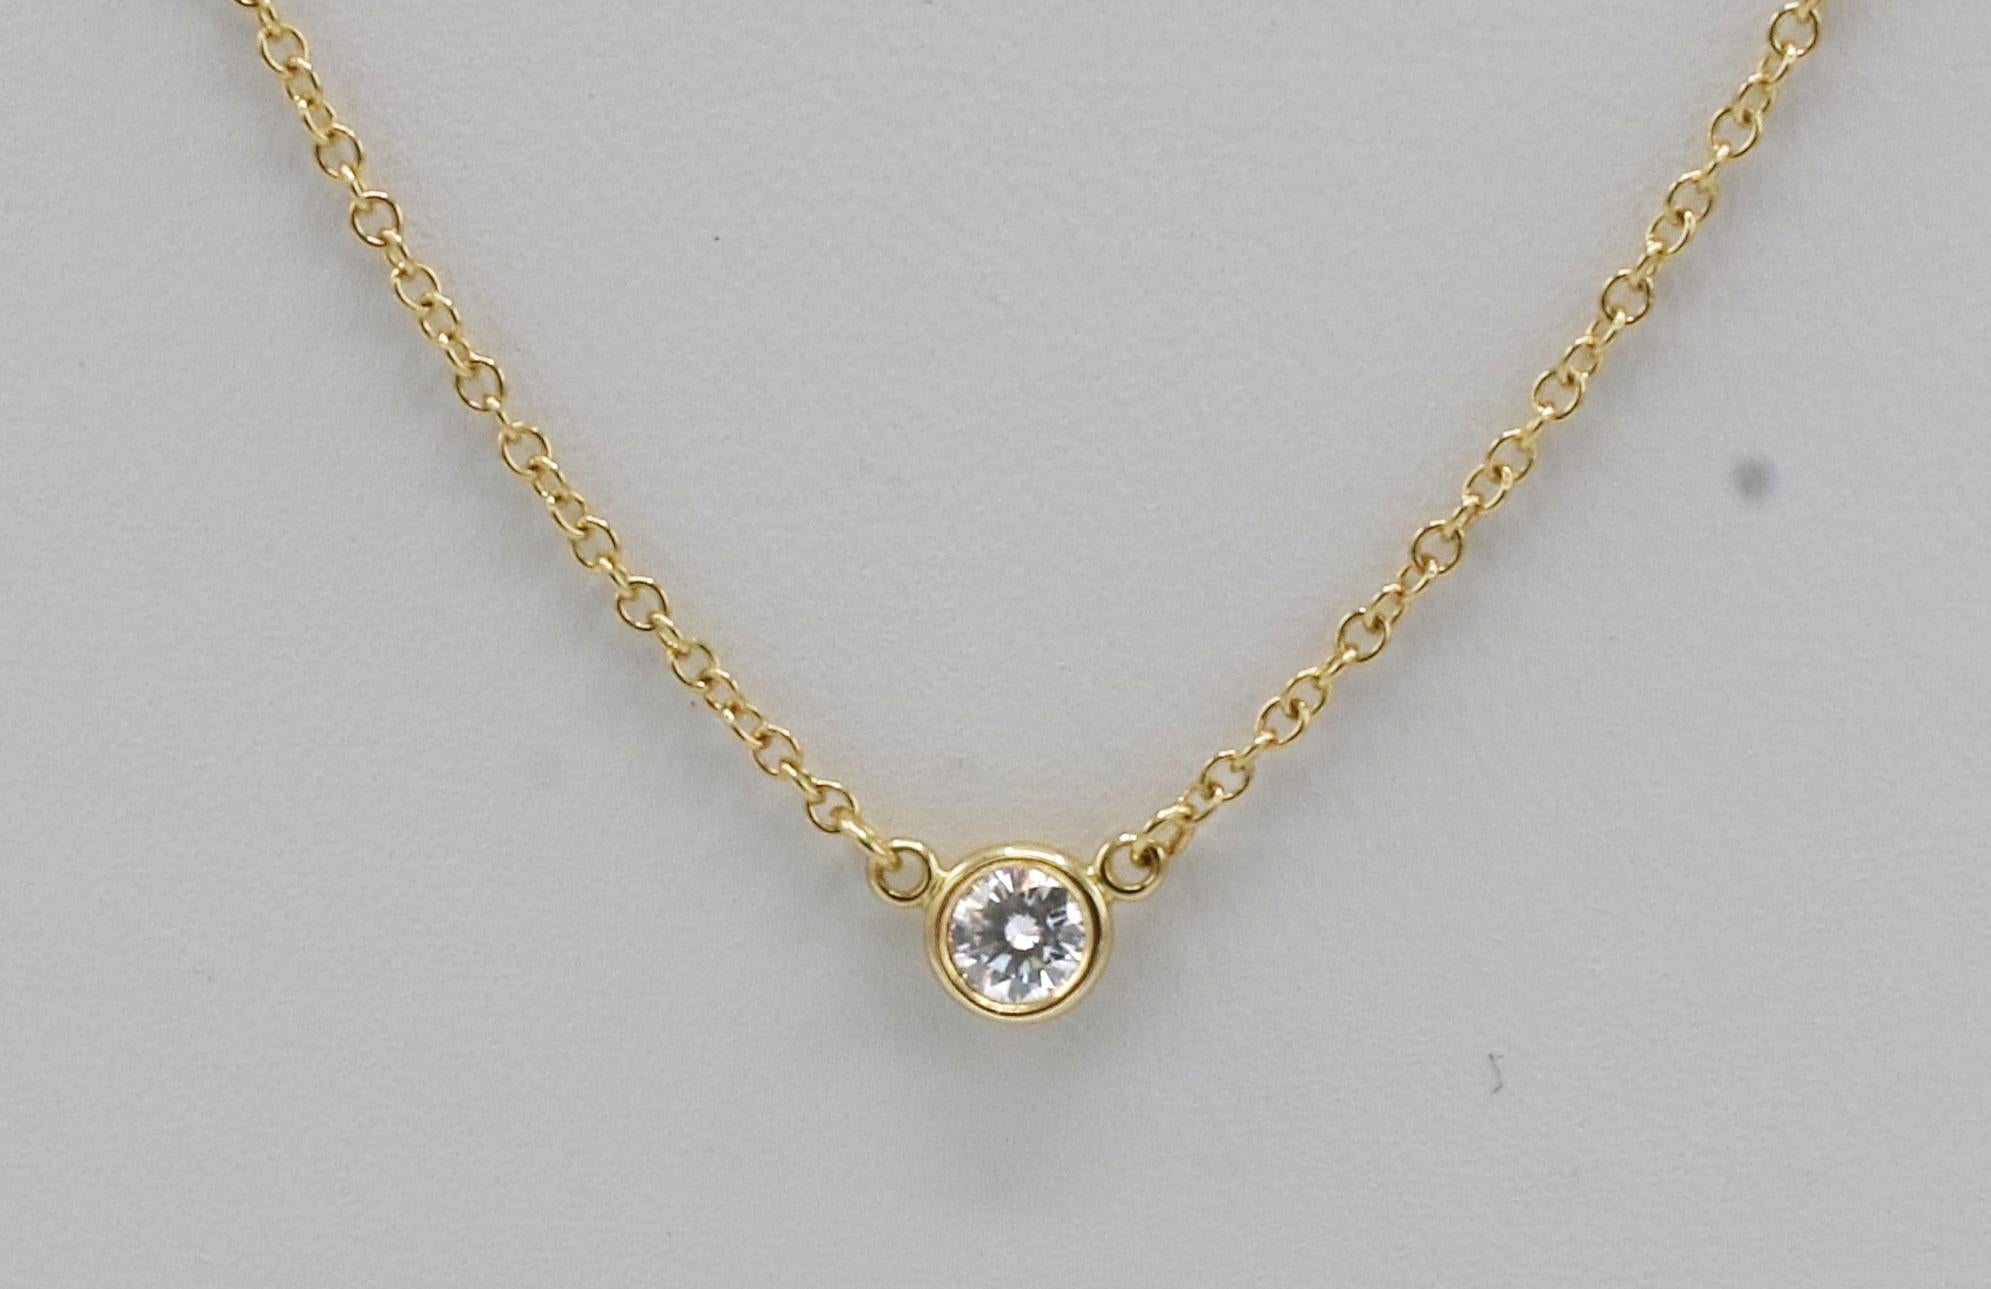 Tiffany & Co. Elsa Peretti Natural Diamond By The Yard Single Pendant Necklace 
Metal: 18k yellow gold
Weight: 1.86 grams
Diamond: .12 carat F-G VS round natural diamond
Chain length: 18 inches
Retail: $1,200 USD